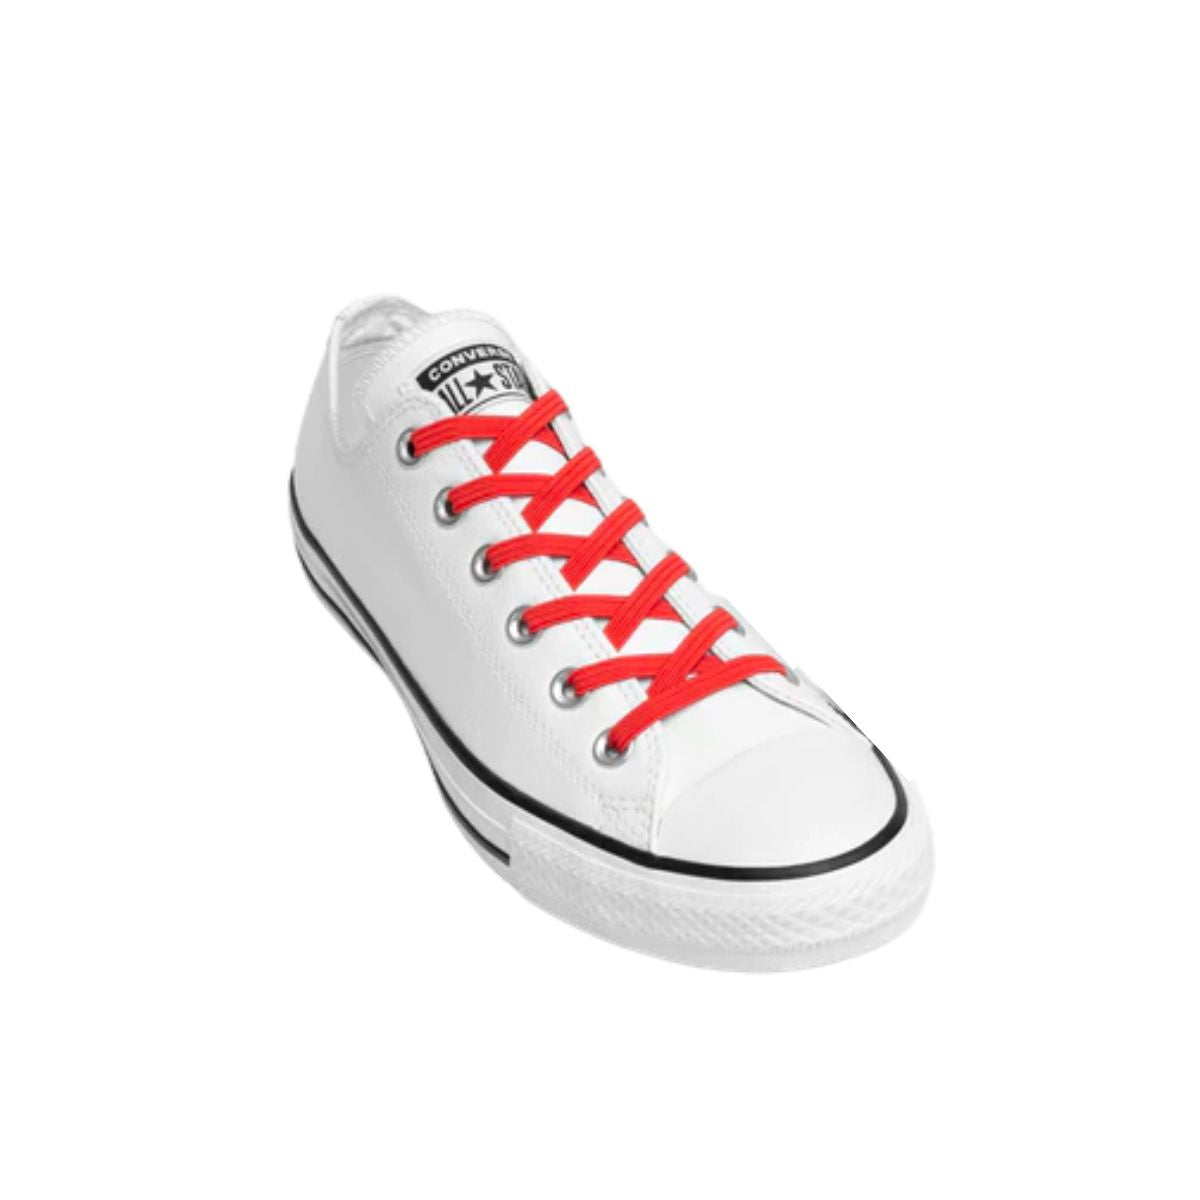 Replacement for Shoe Laces Red No-Tie Shoelaces